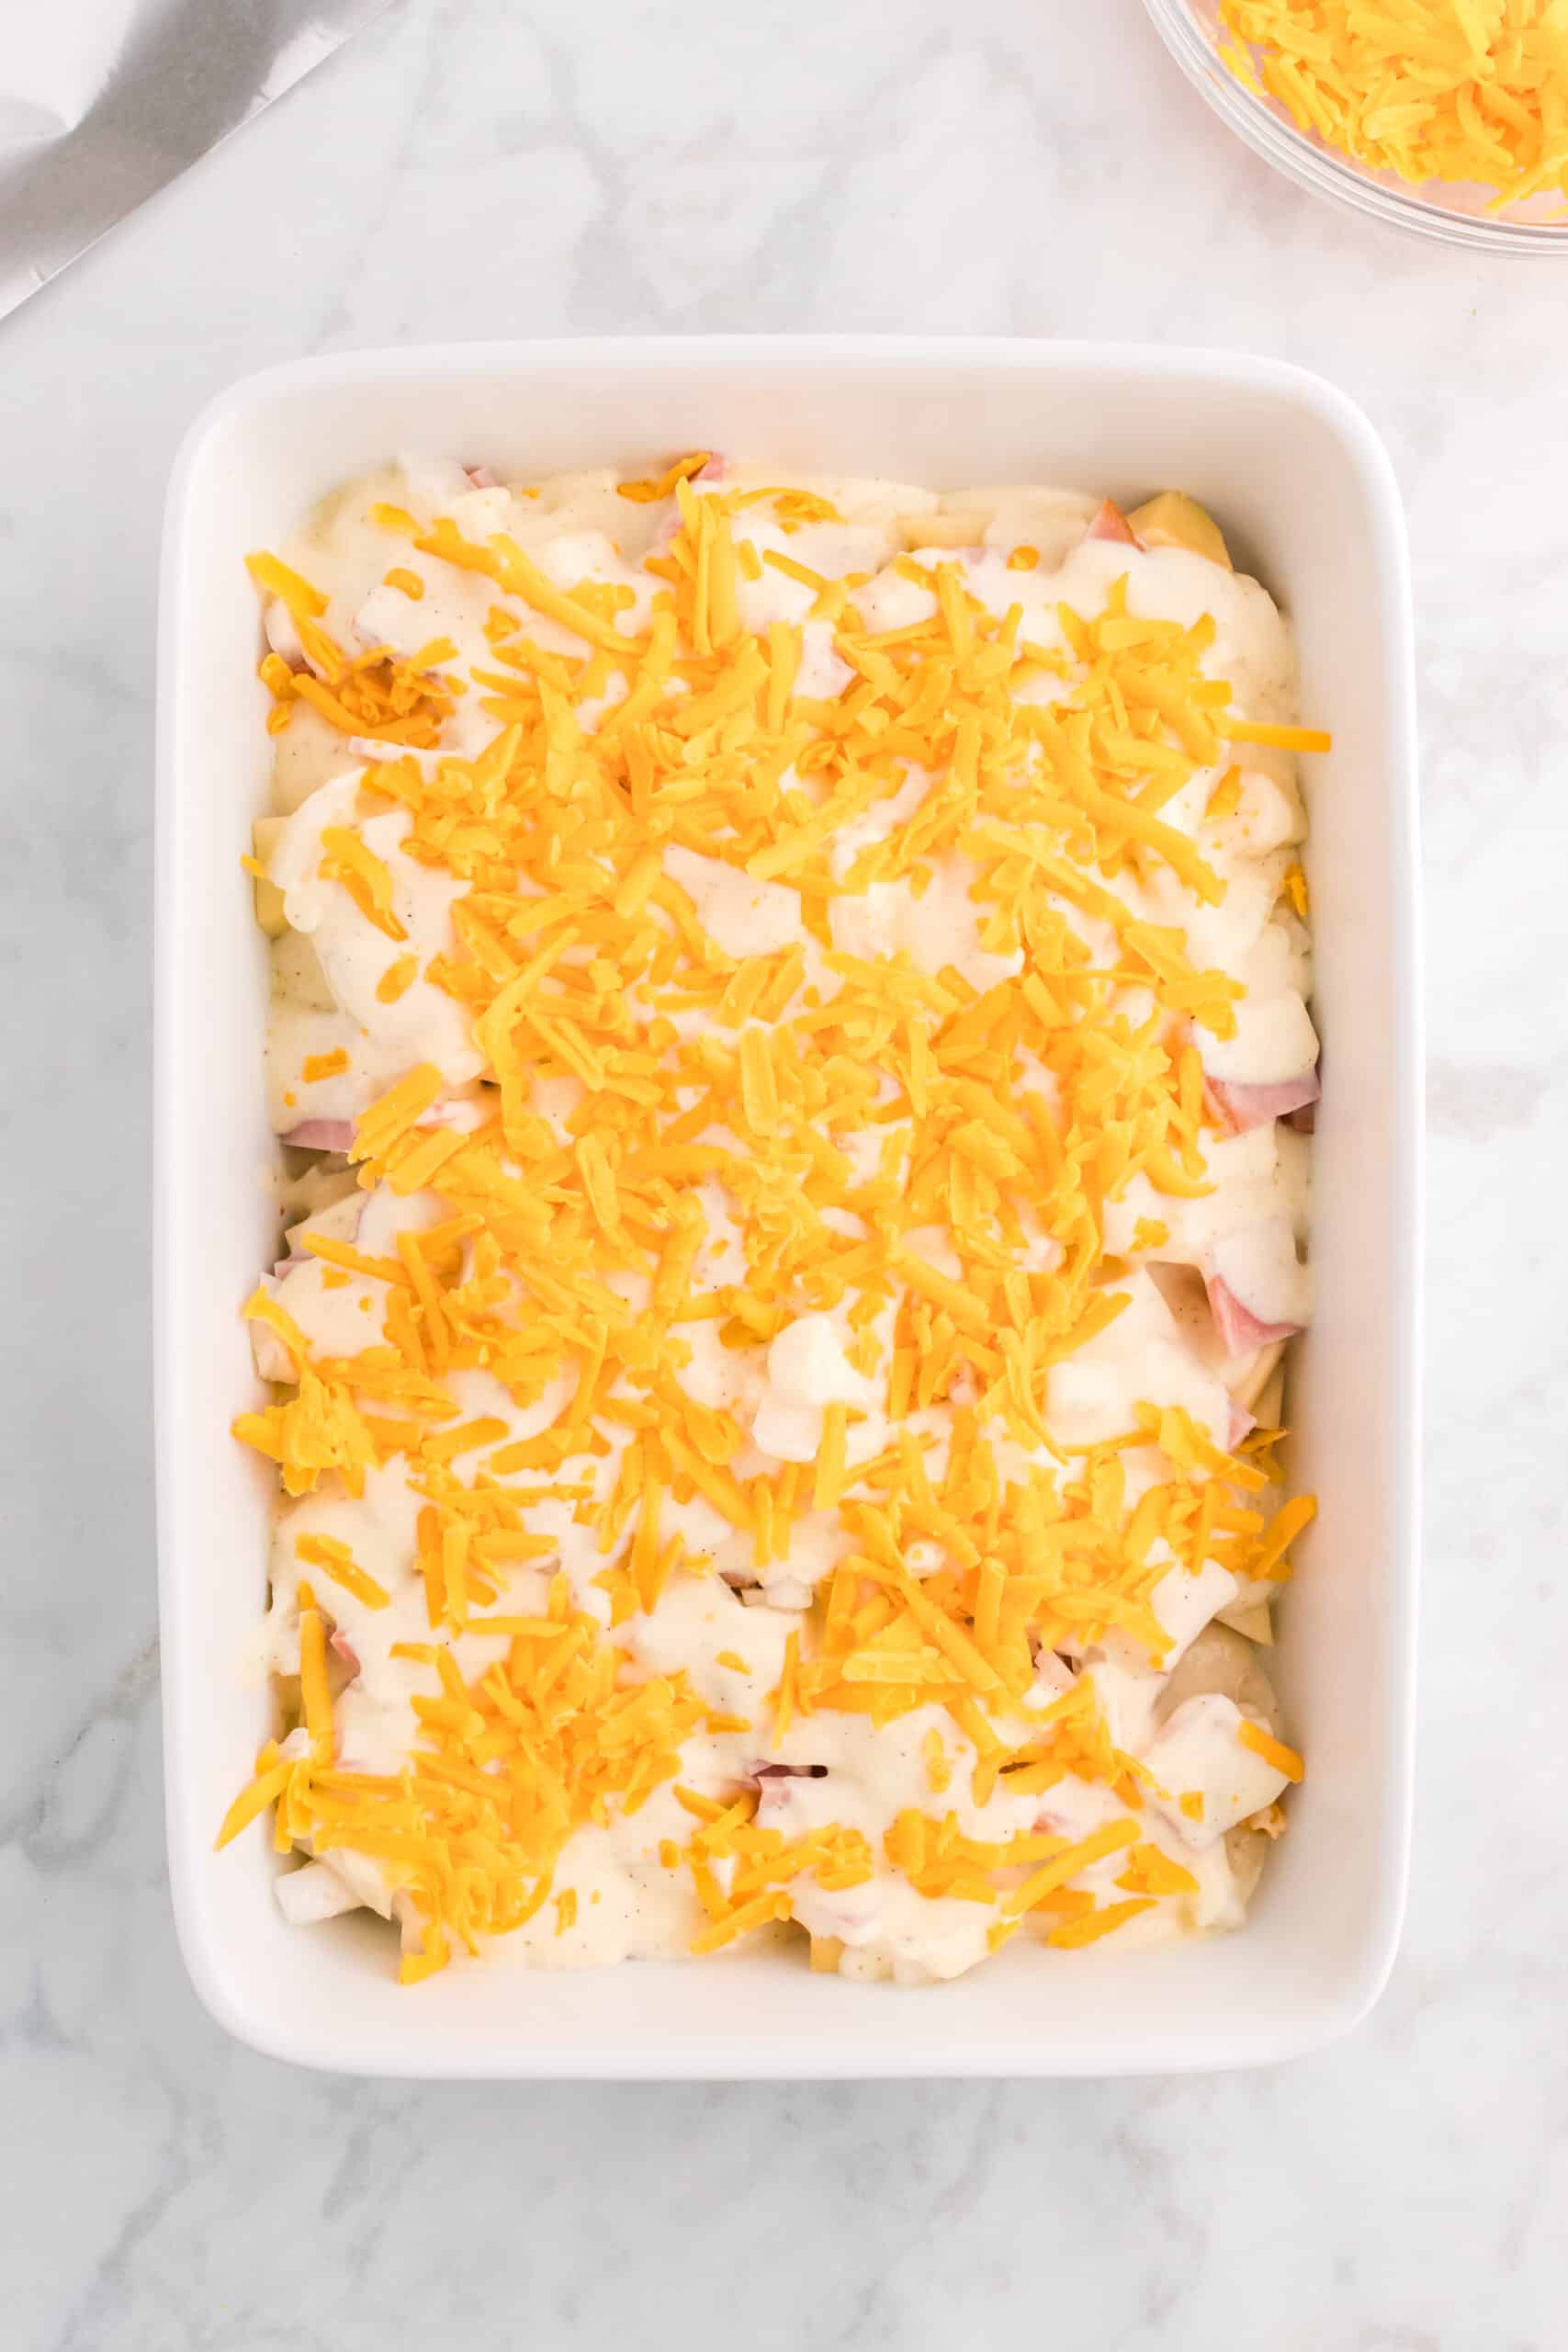 shredded cheese on top of soup mixture over ham and potatoes in a baking dish